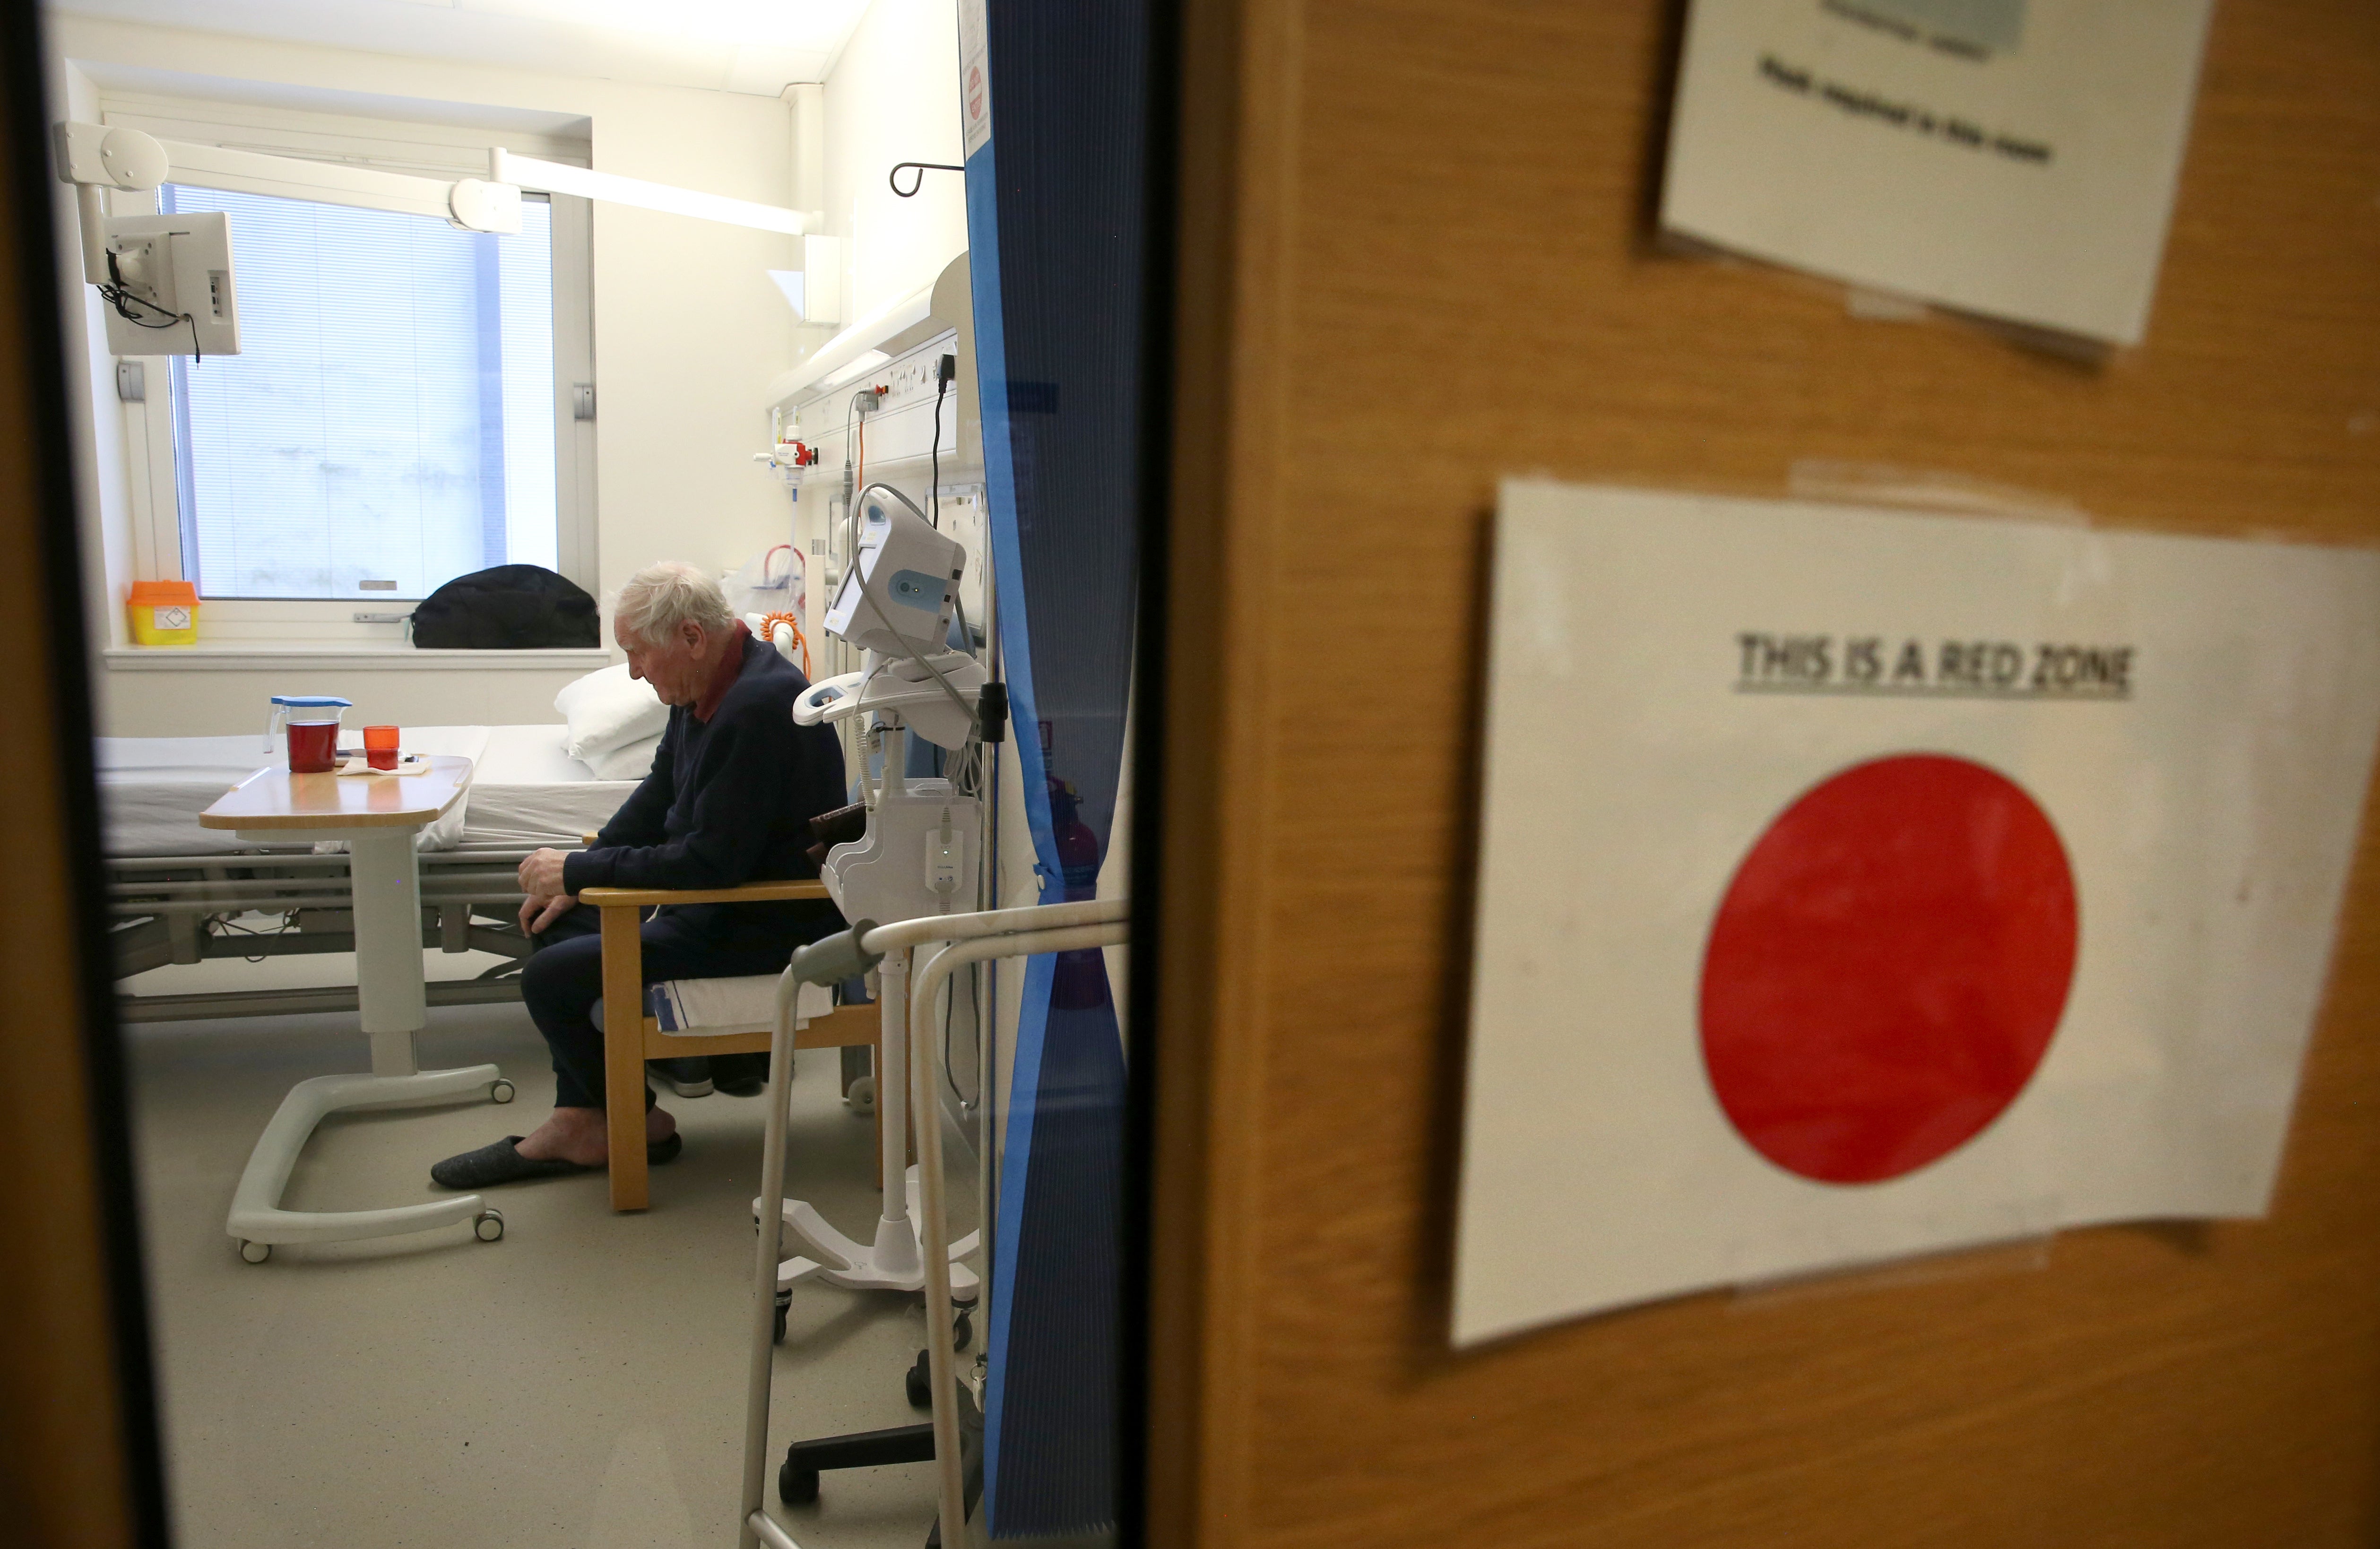 Scotland’s hospitals are dealing with a record number of Covid patients, the latest figures showed (Andrew Milligan/PA)